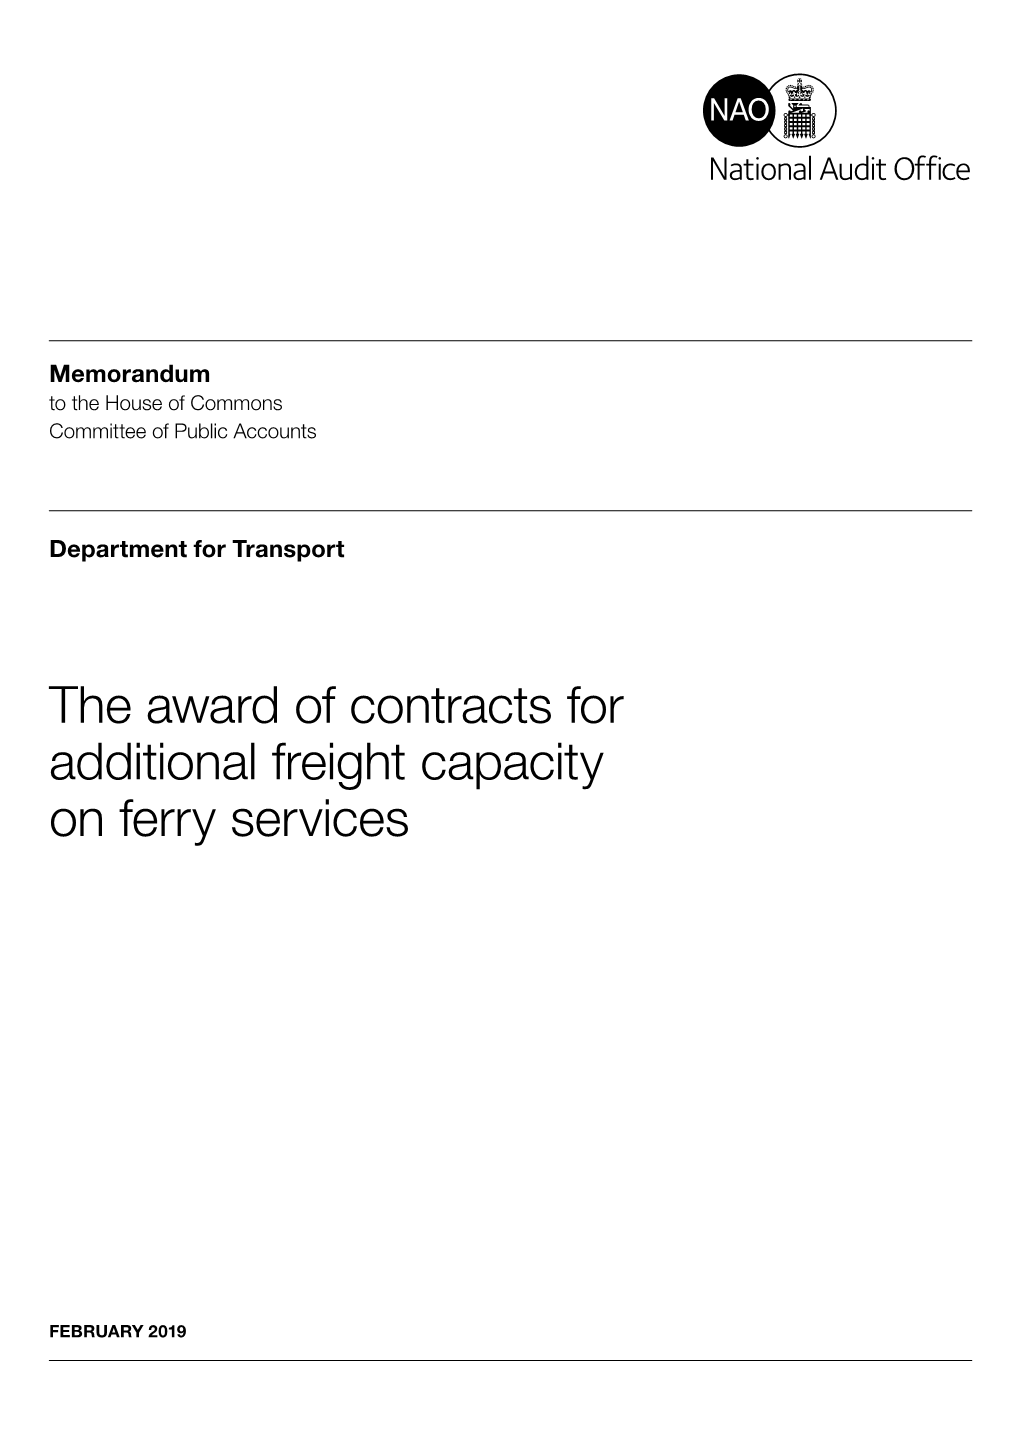 The Award of Contracts for Additional Freight Capacity on Ferry Services